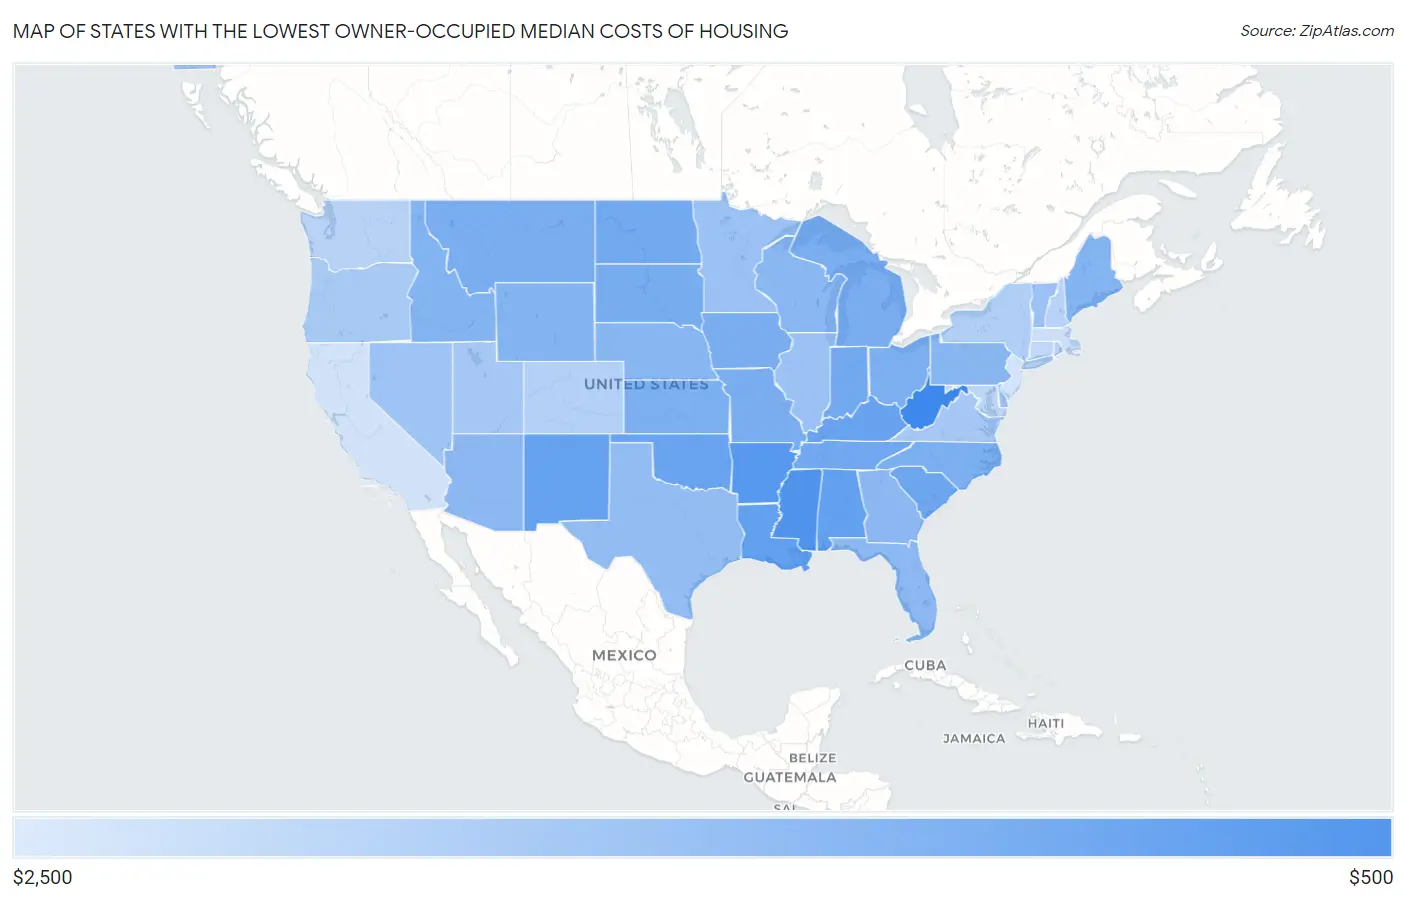 States with the Lowest Owner-Occupied Median Costs of Housing in the United States Map